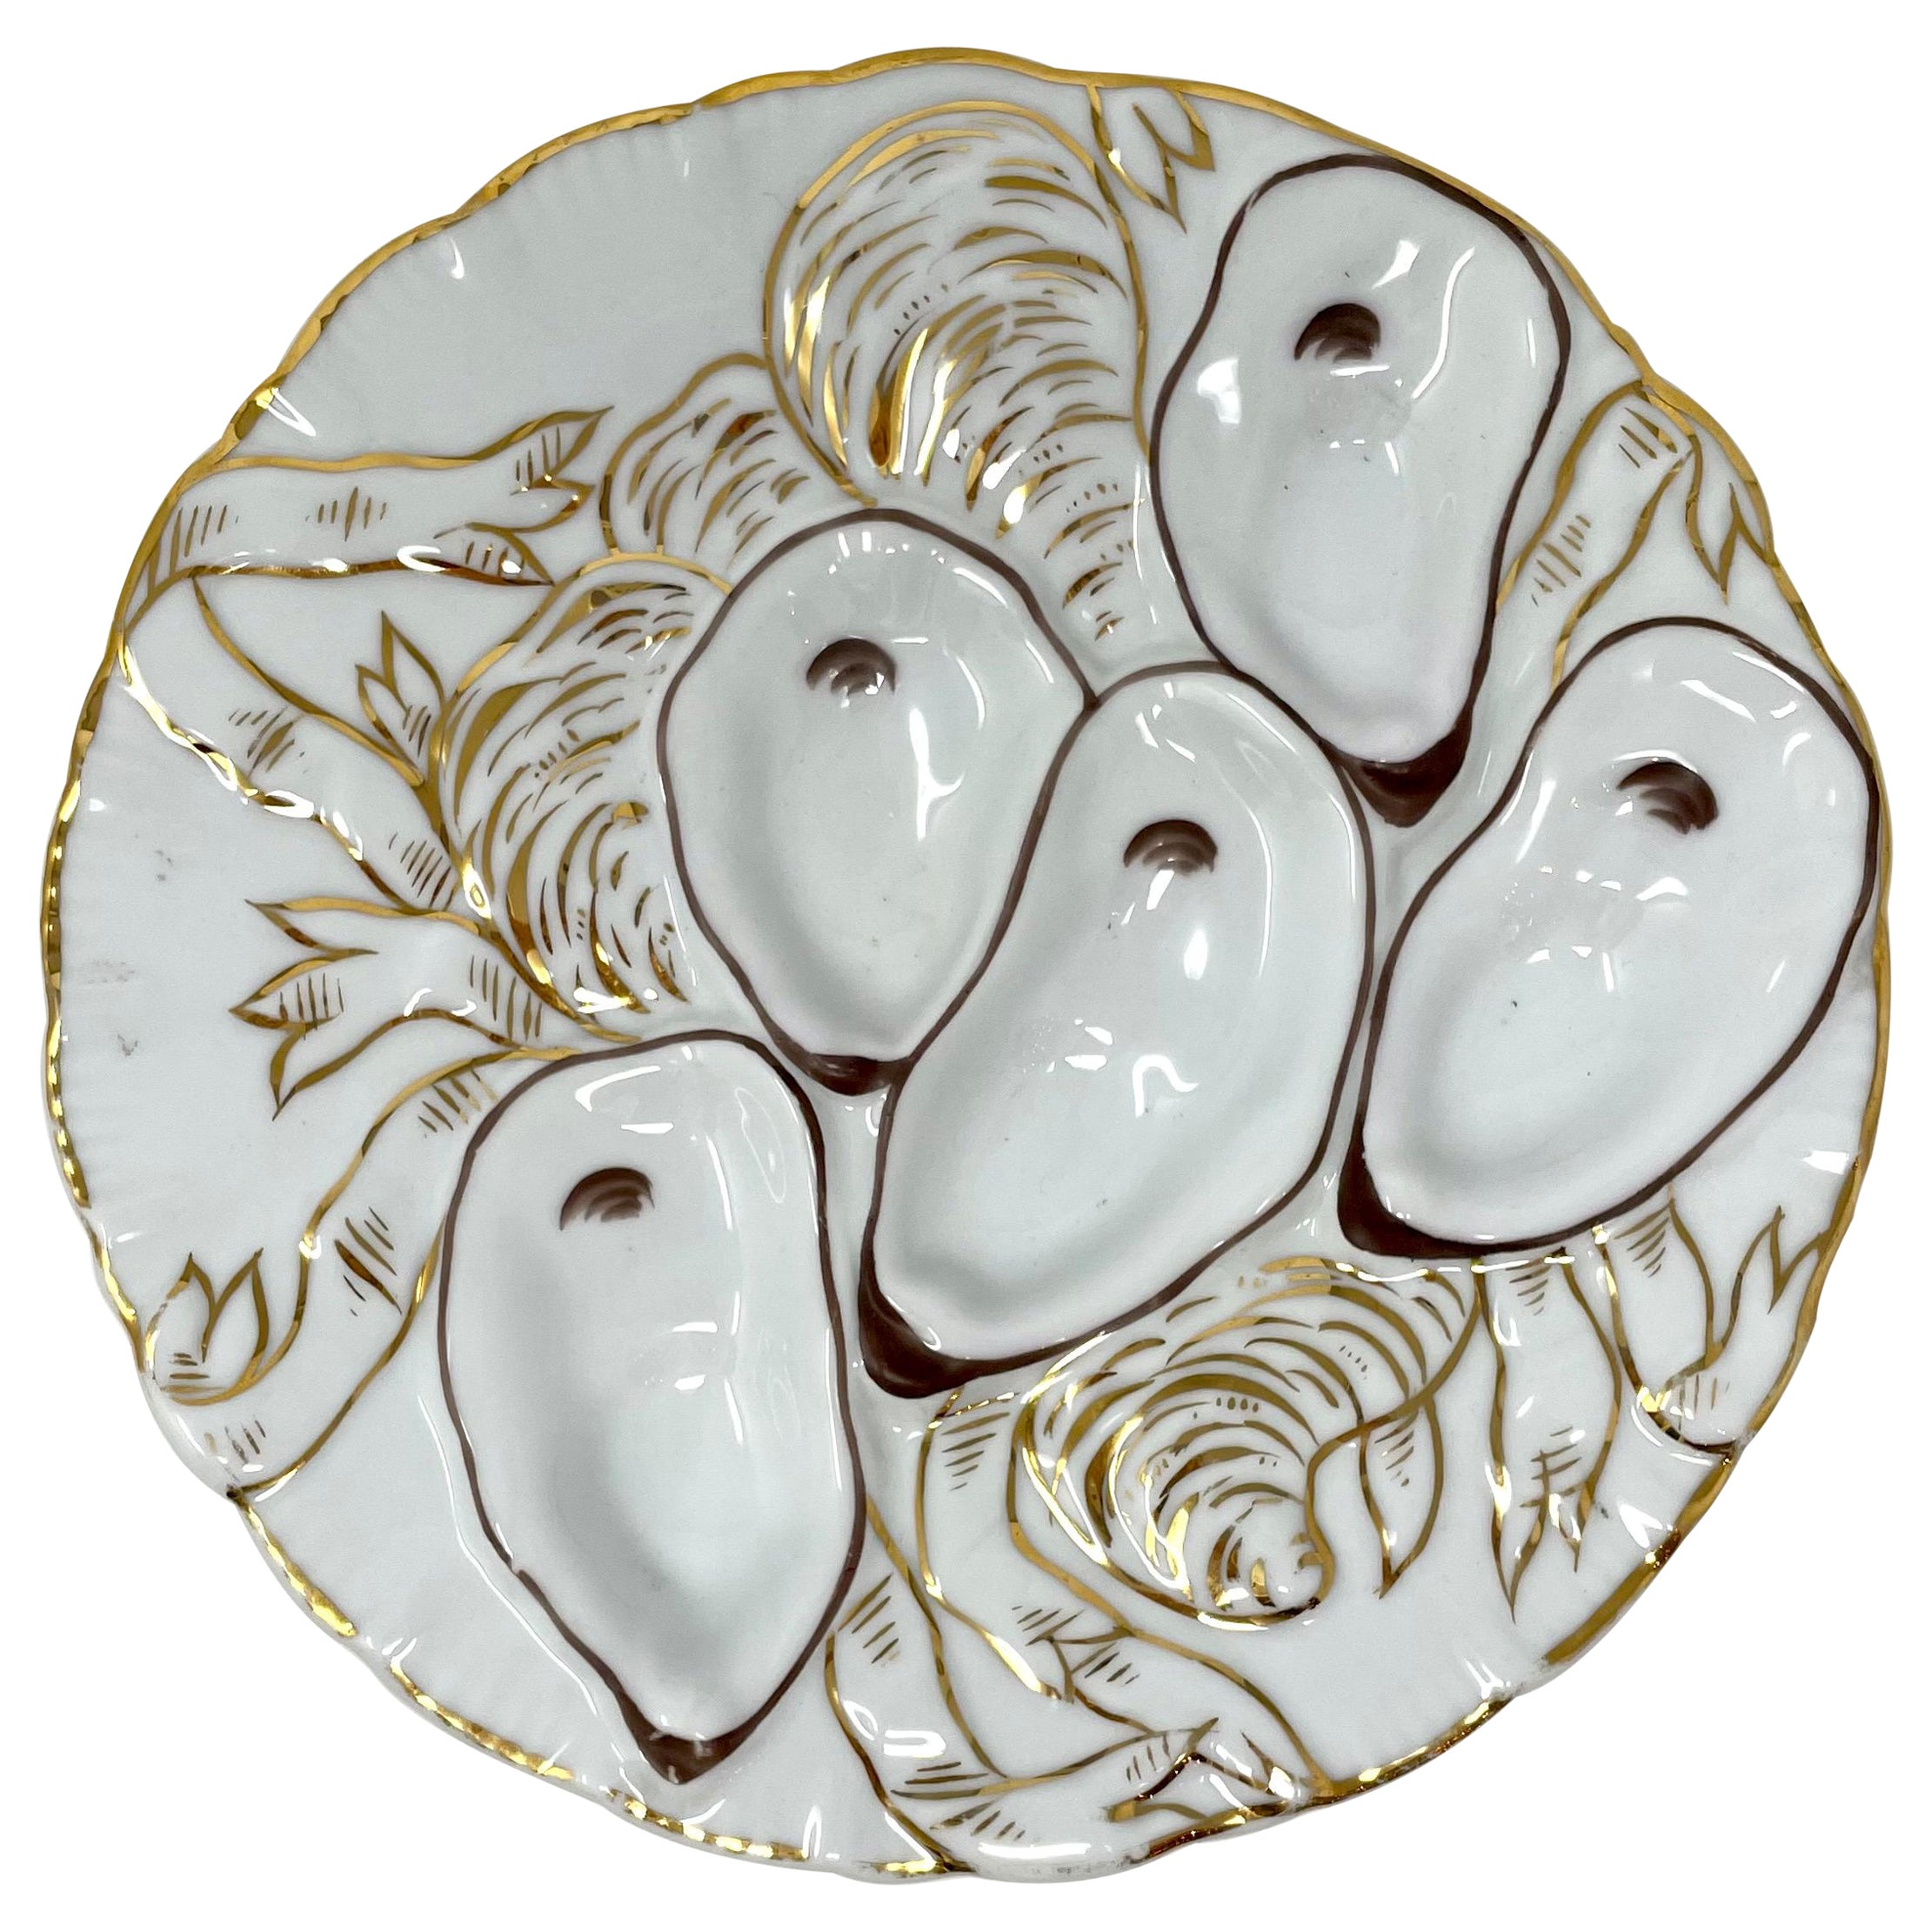 Antique German Hand-Painted Gold & White Porcelain Oyster Plate, Circa 1880's